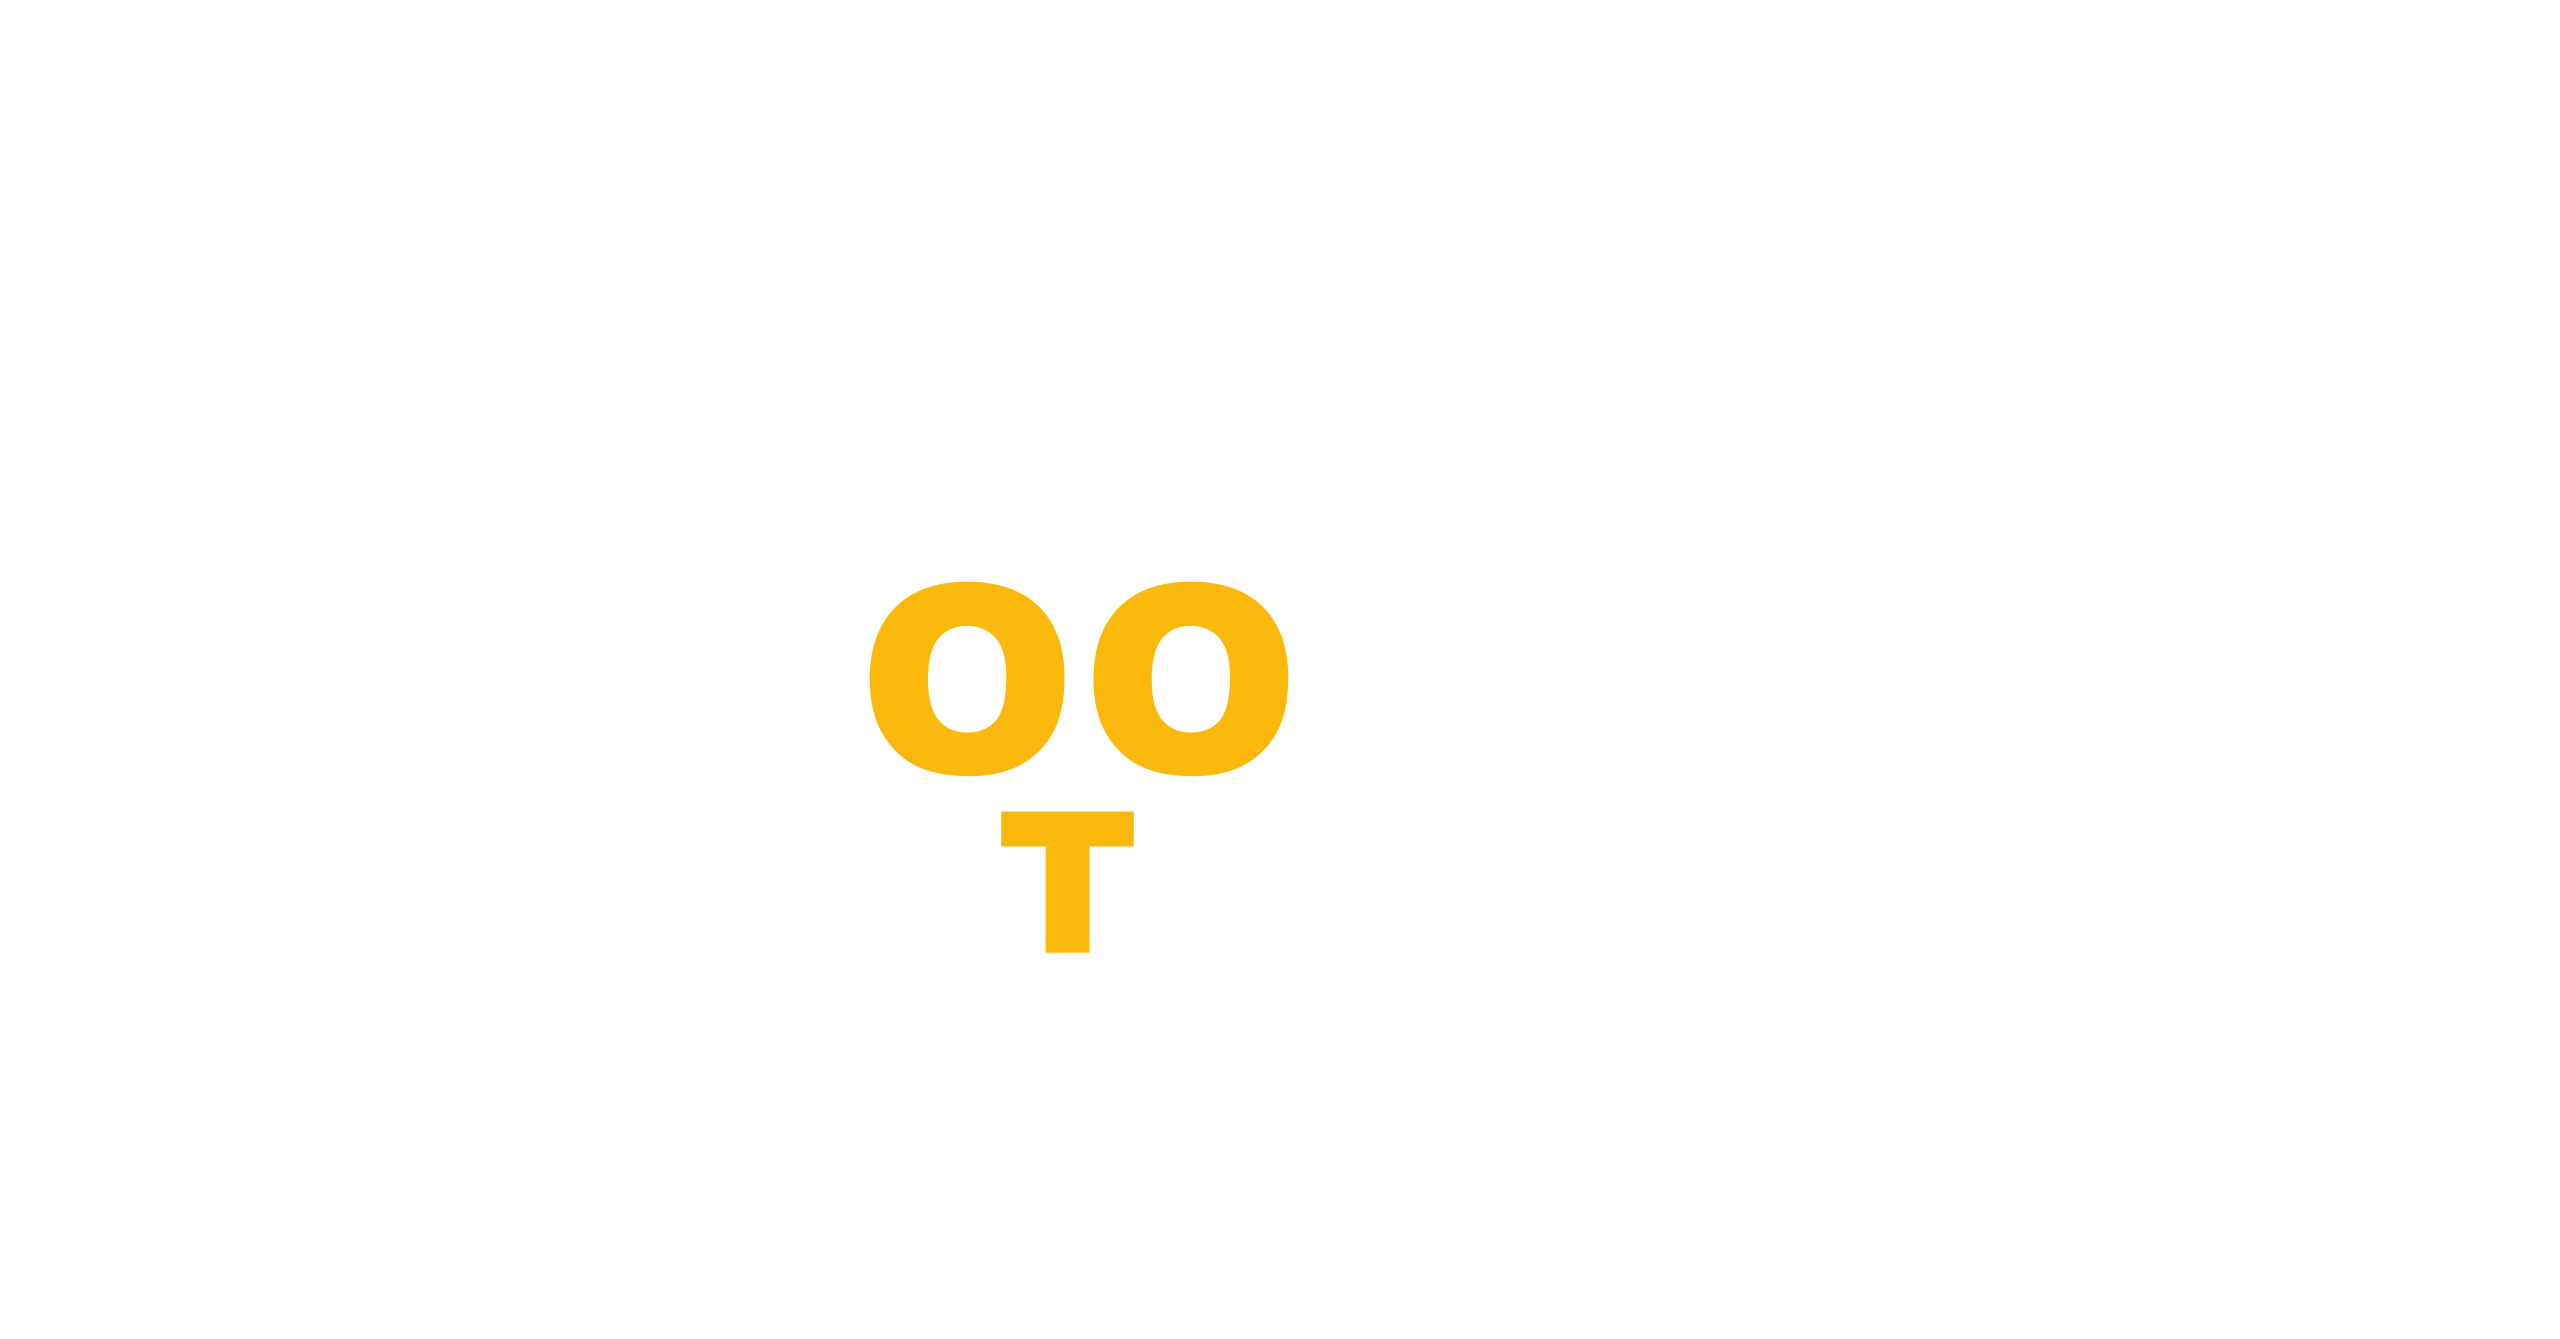  wiroon